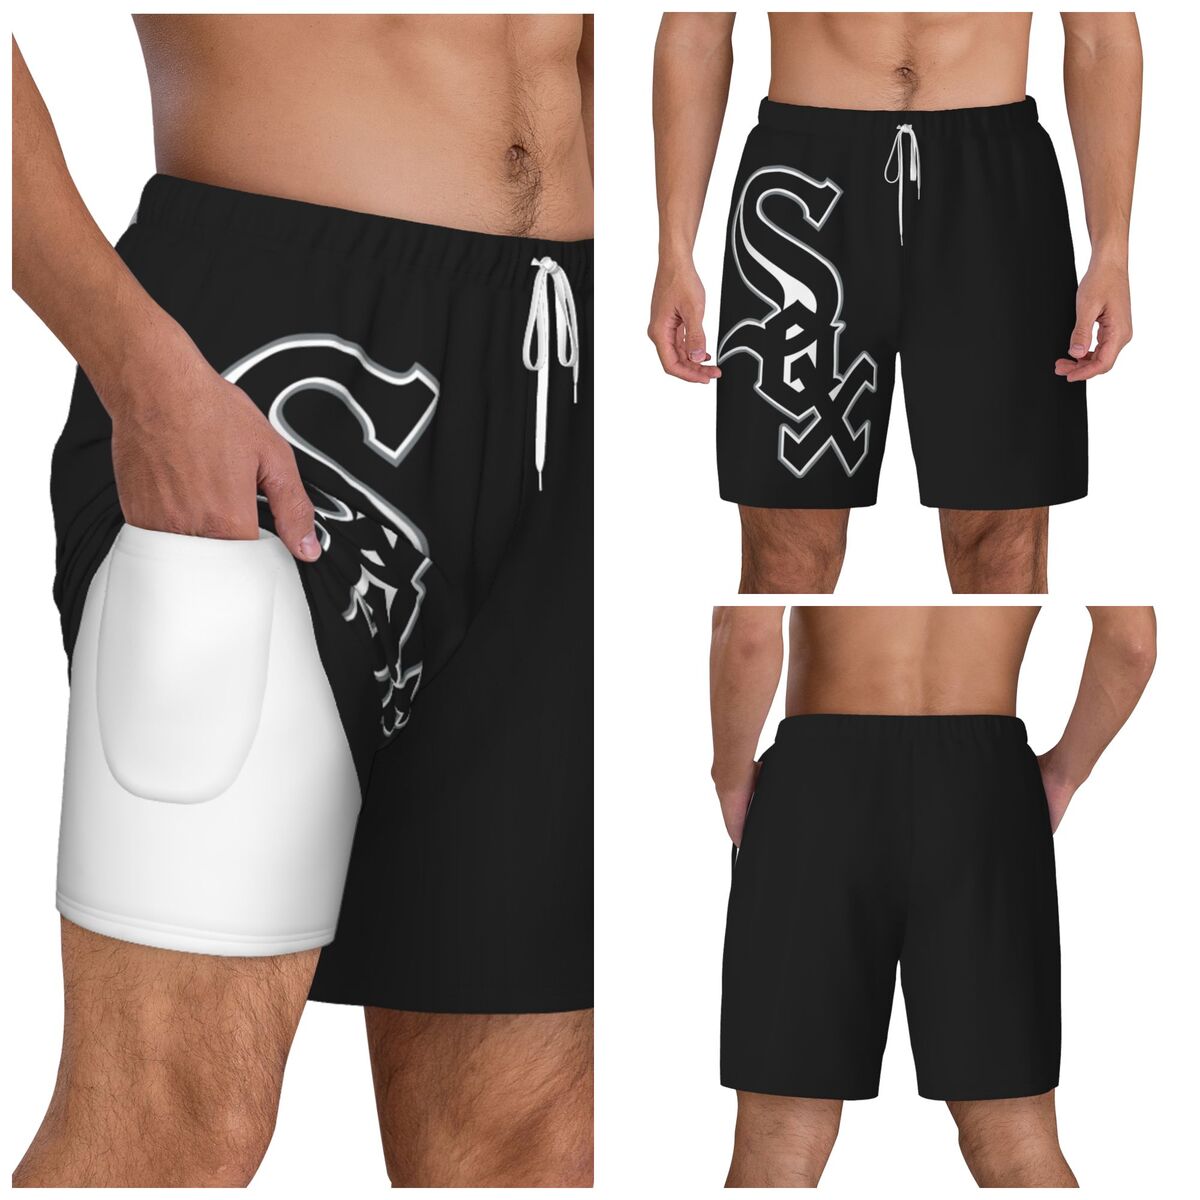 Chicago White Sox Men's Swim Trunks with Compression Liner